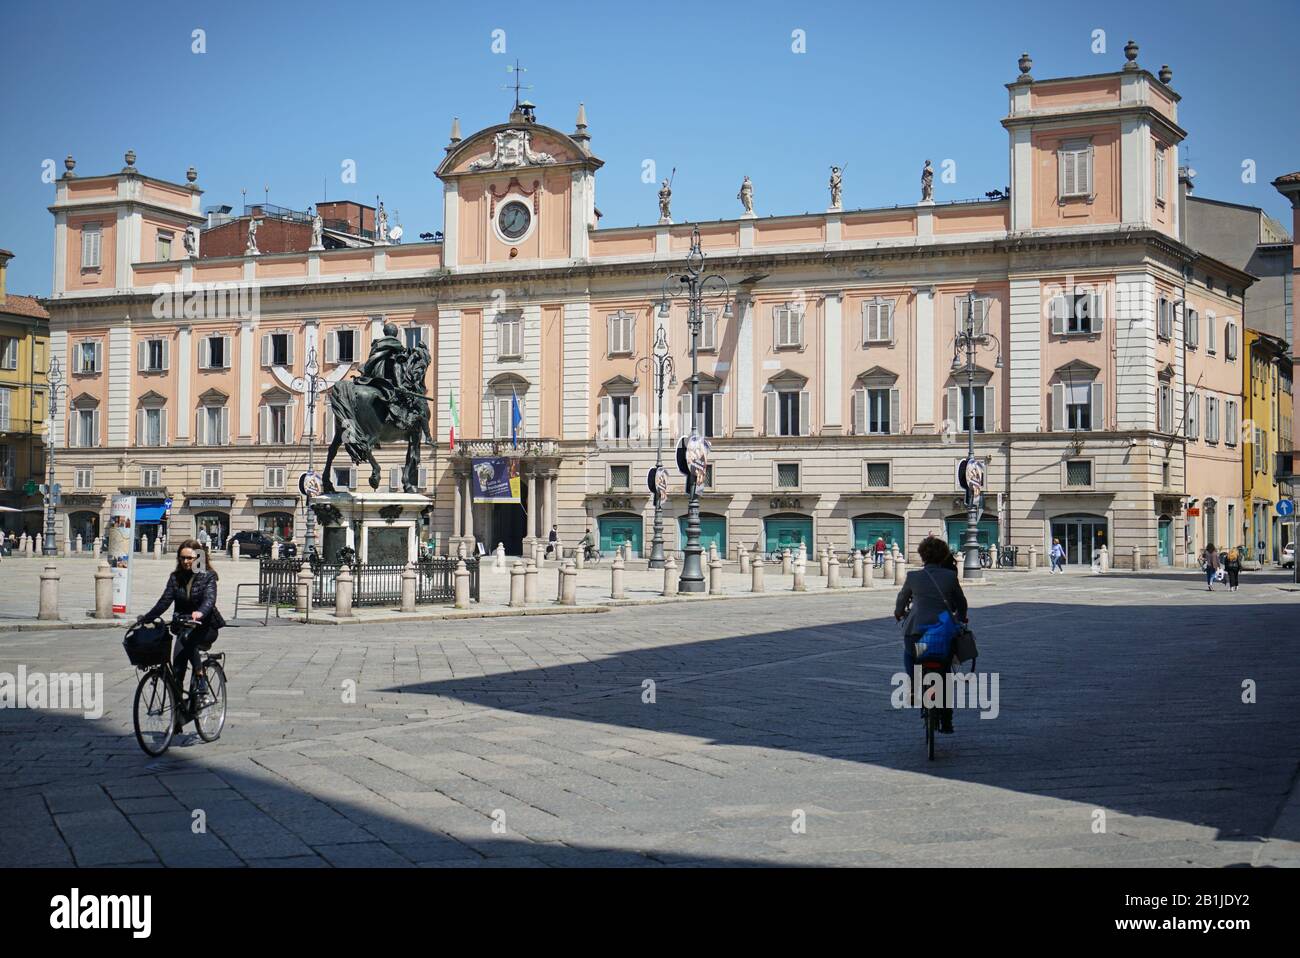 The car-free historic centre of Piacenza, with many bicycles and pedestrians. Piacenza, Italy - april 2019 Stock Photo